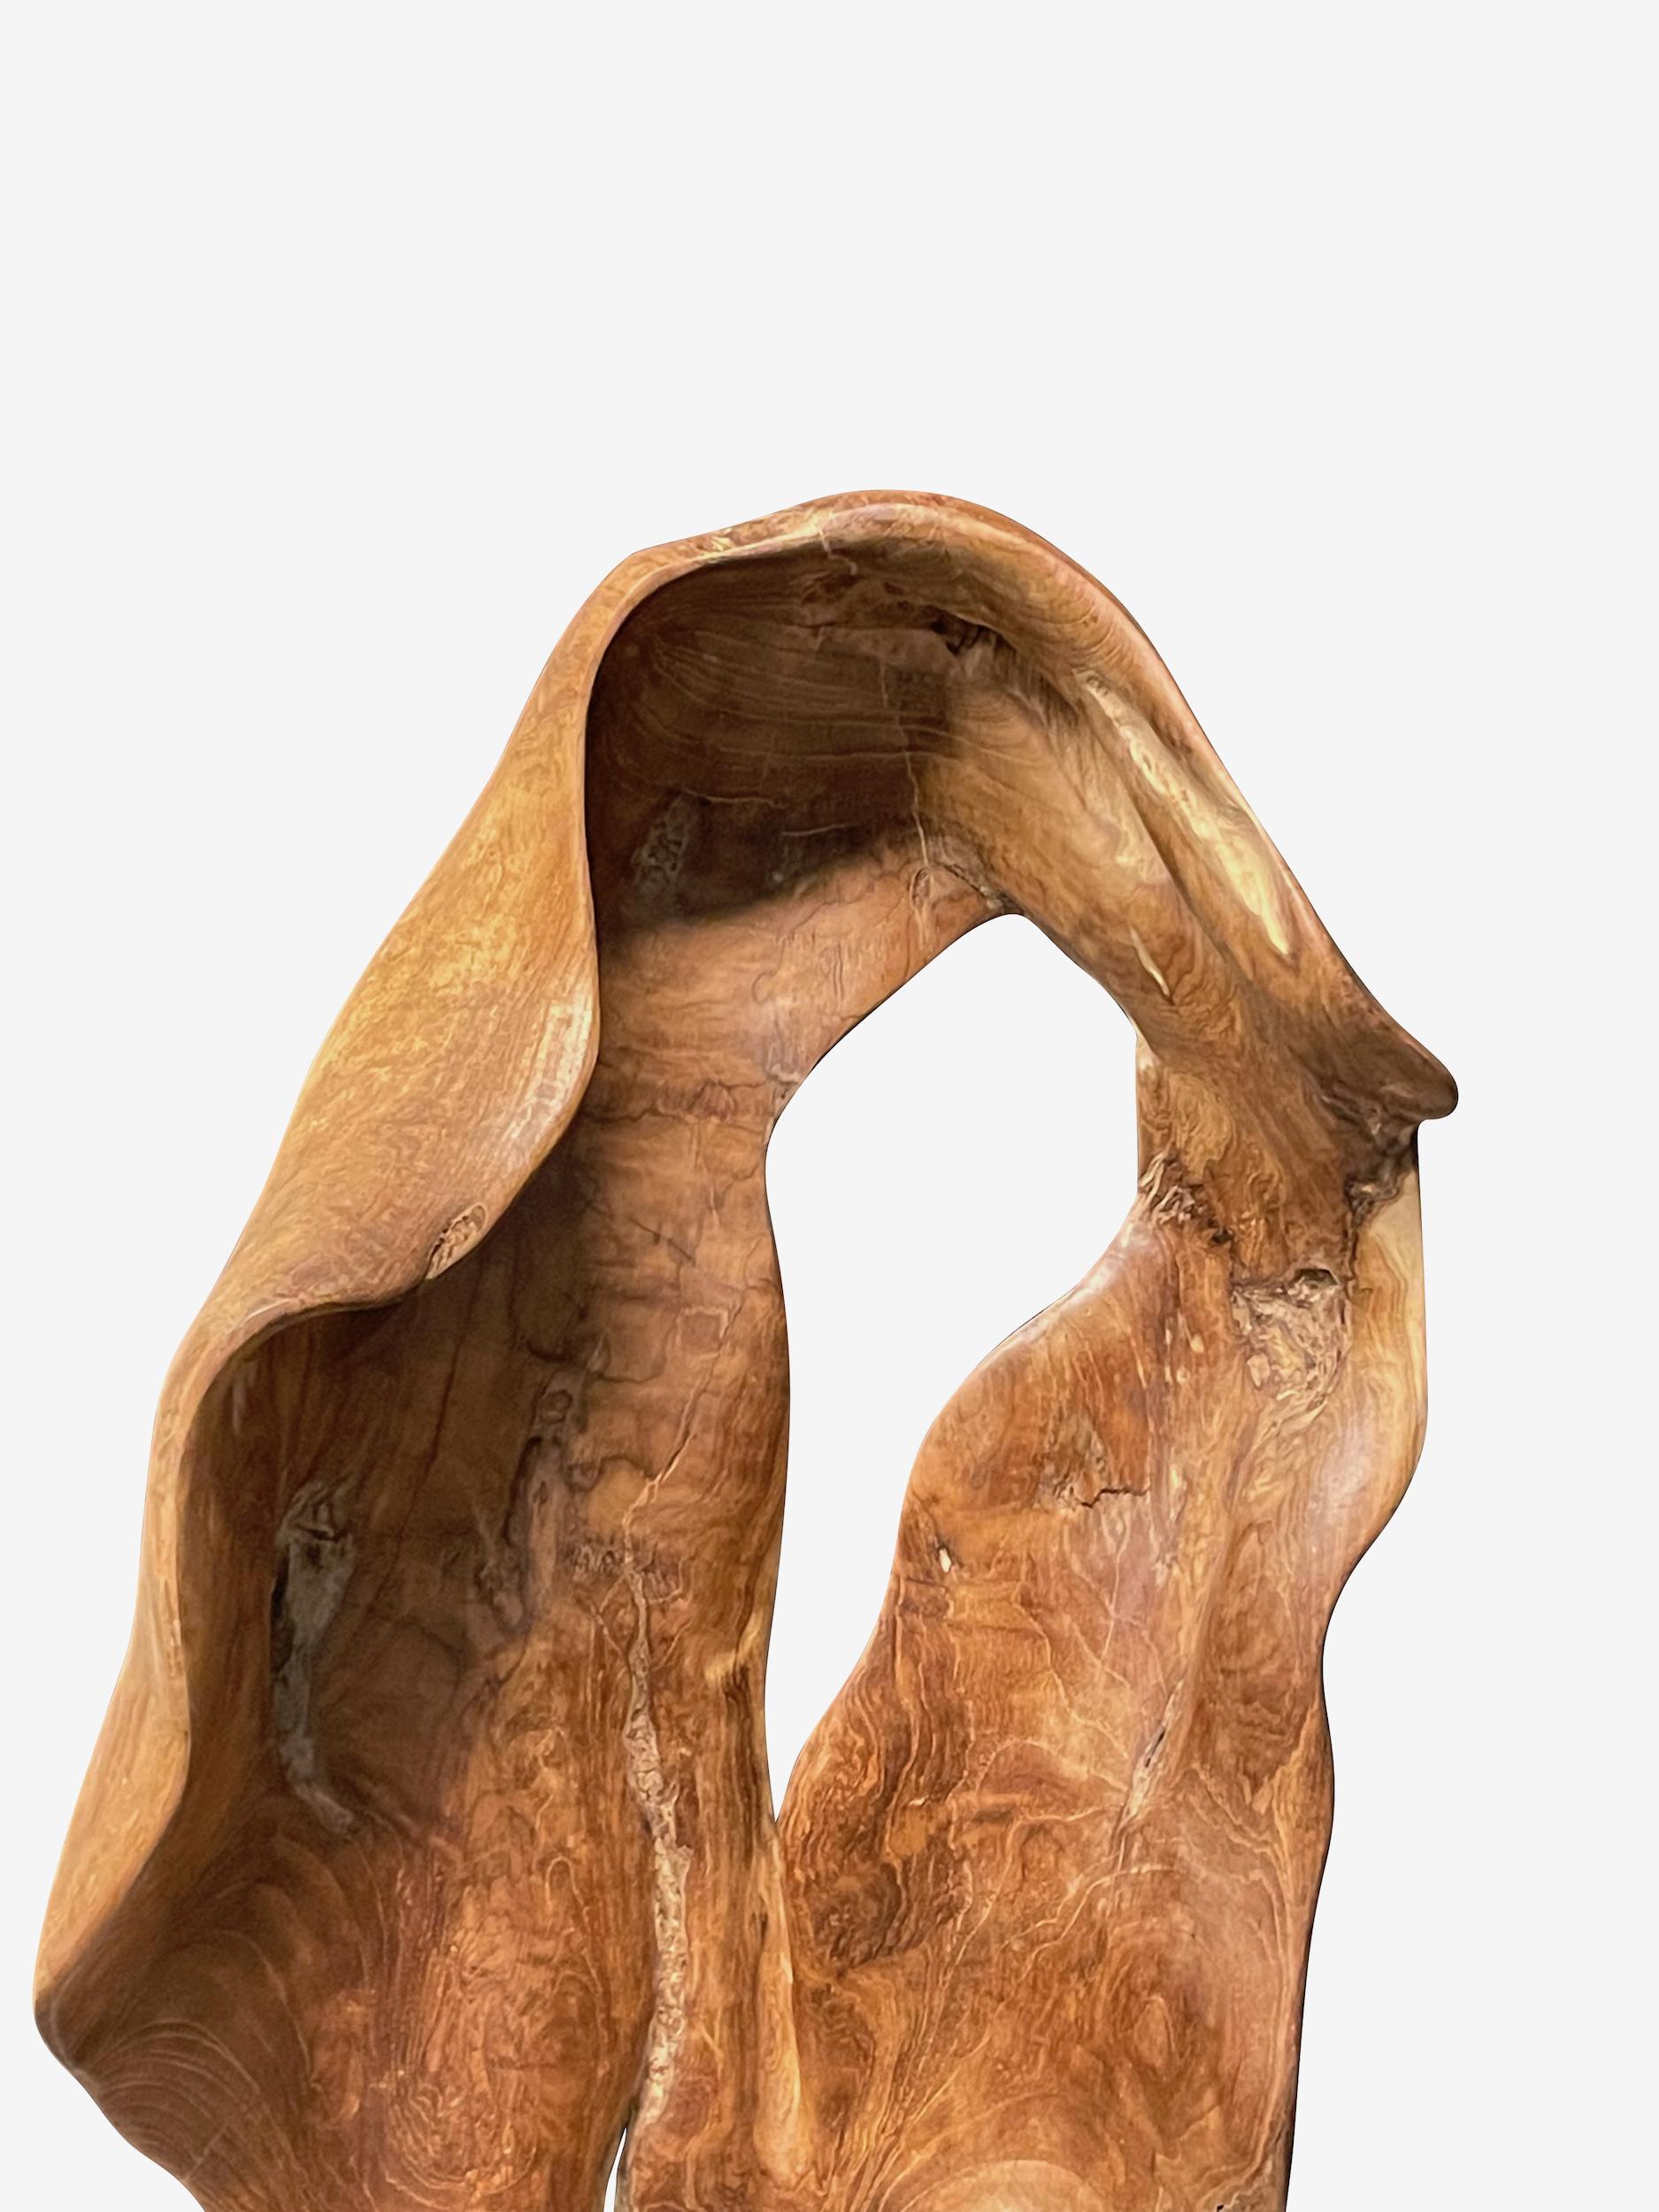 Contemporary Indonesian teak sculpture on stand.
Free form organic shapel.
Stand measures 12